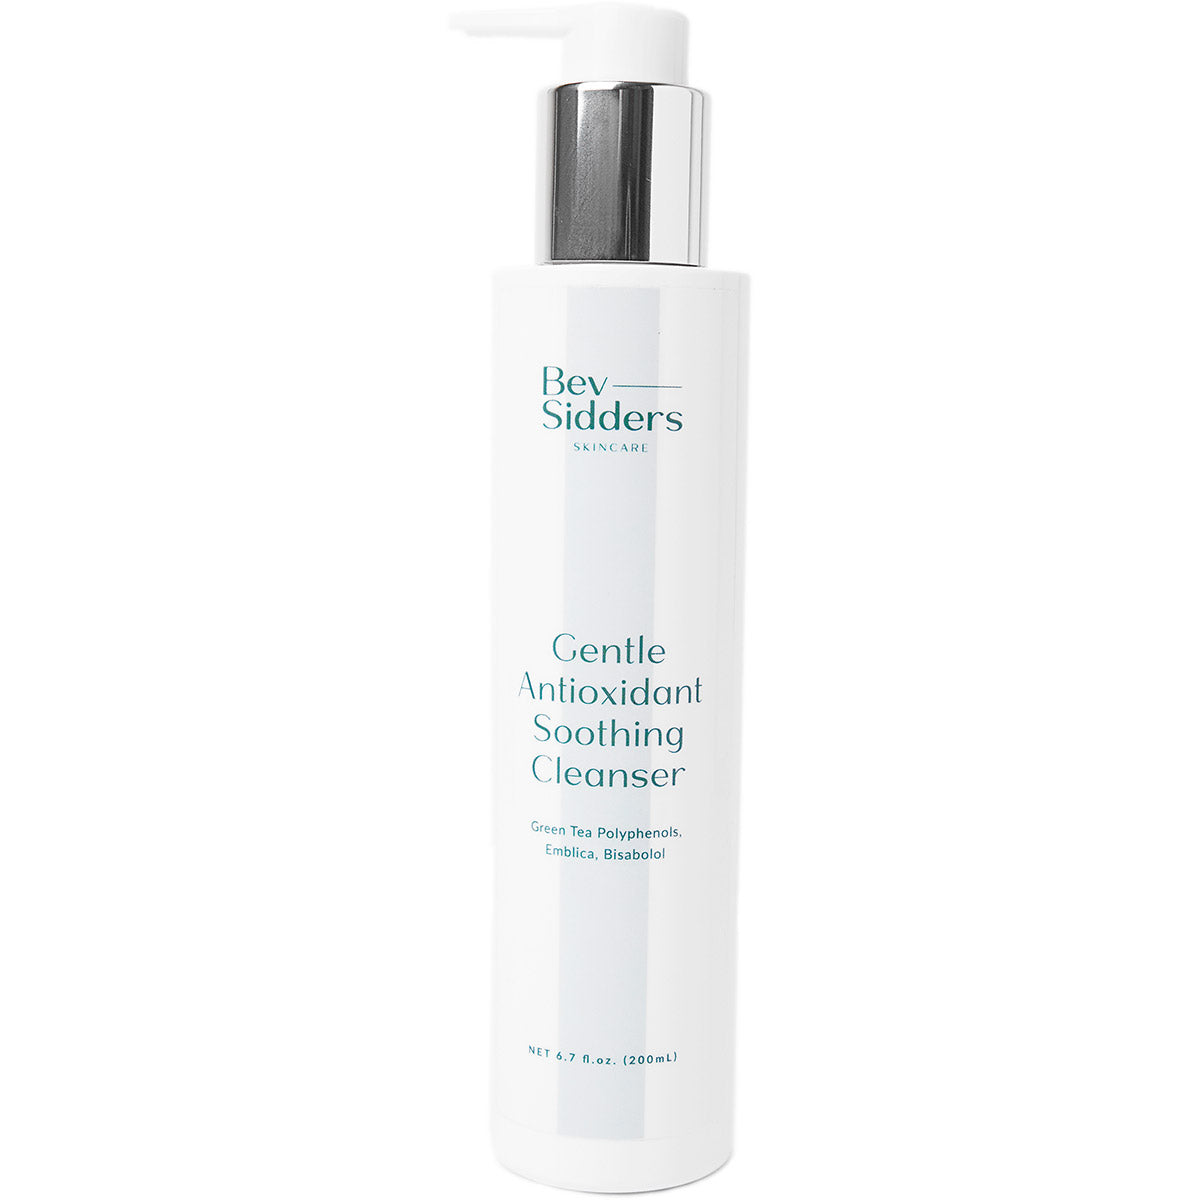 Load image into Gallery viewer, Gentle Antioxidant Soothing Cleanser | Bev Sidders Skincare
